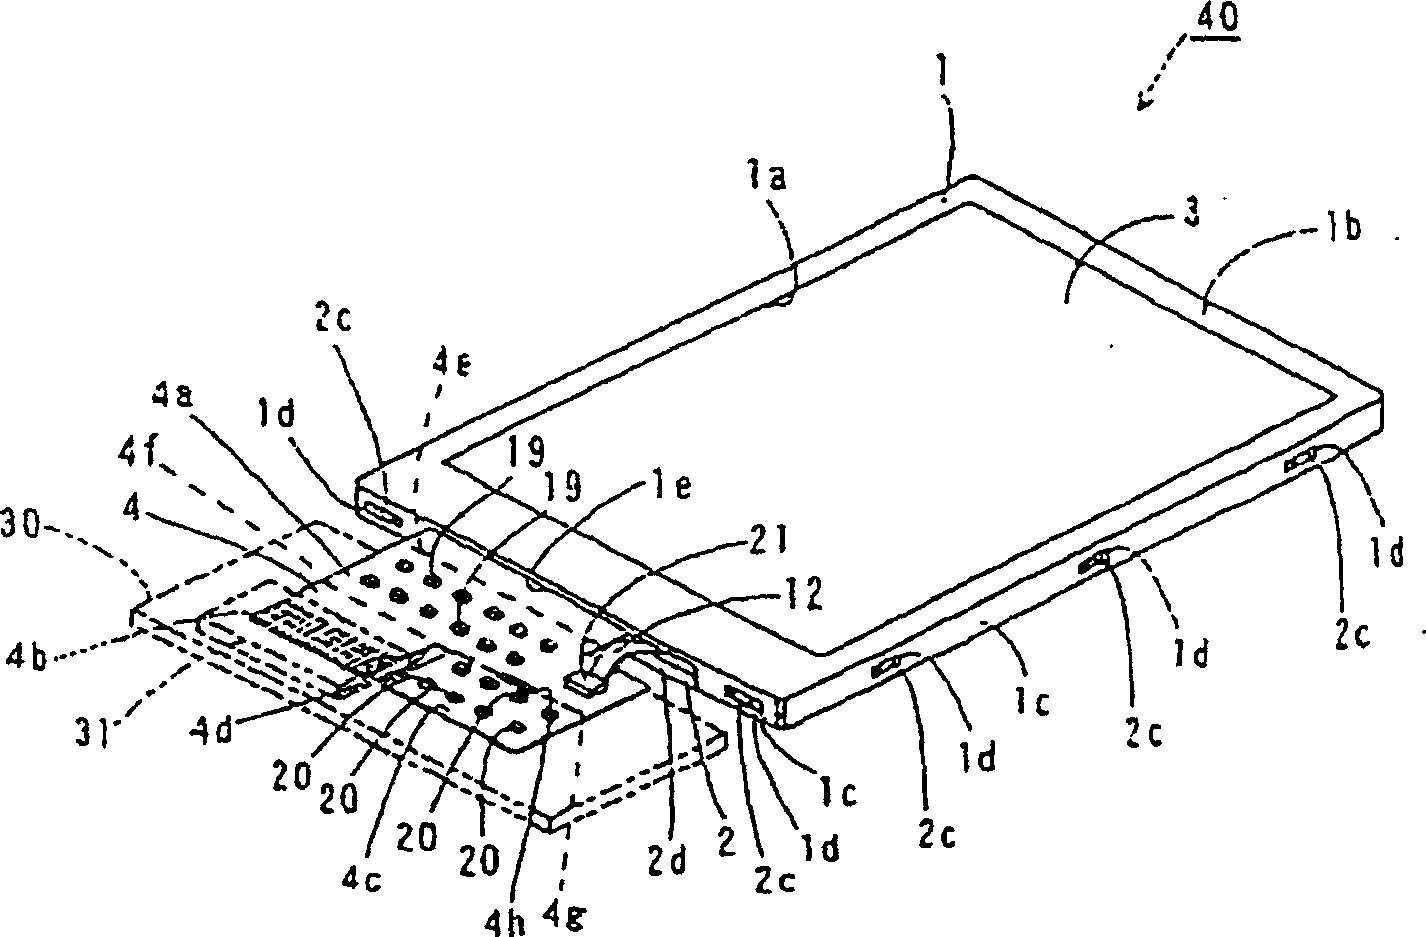 Display and mobile device